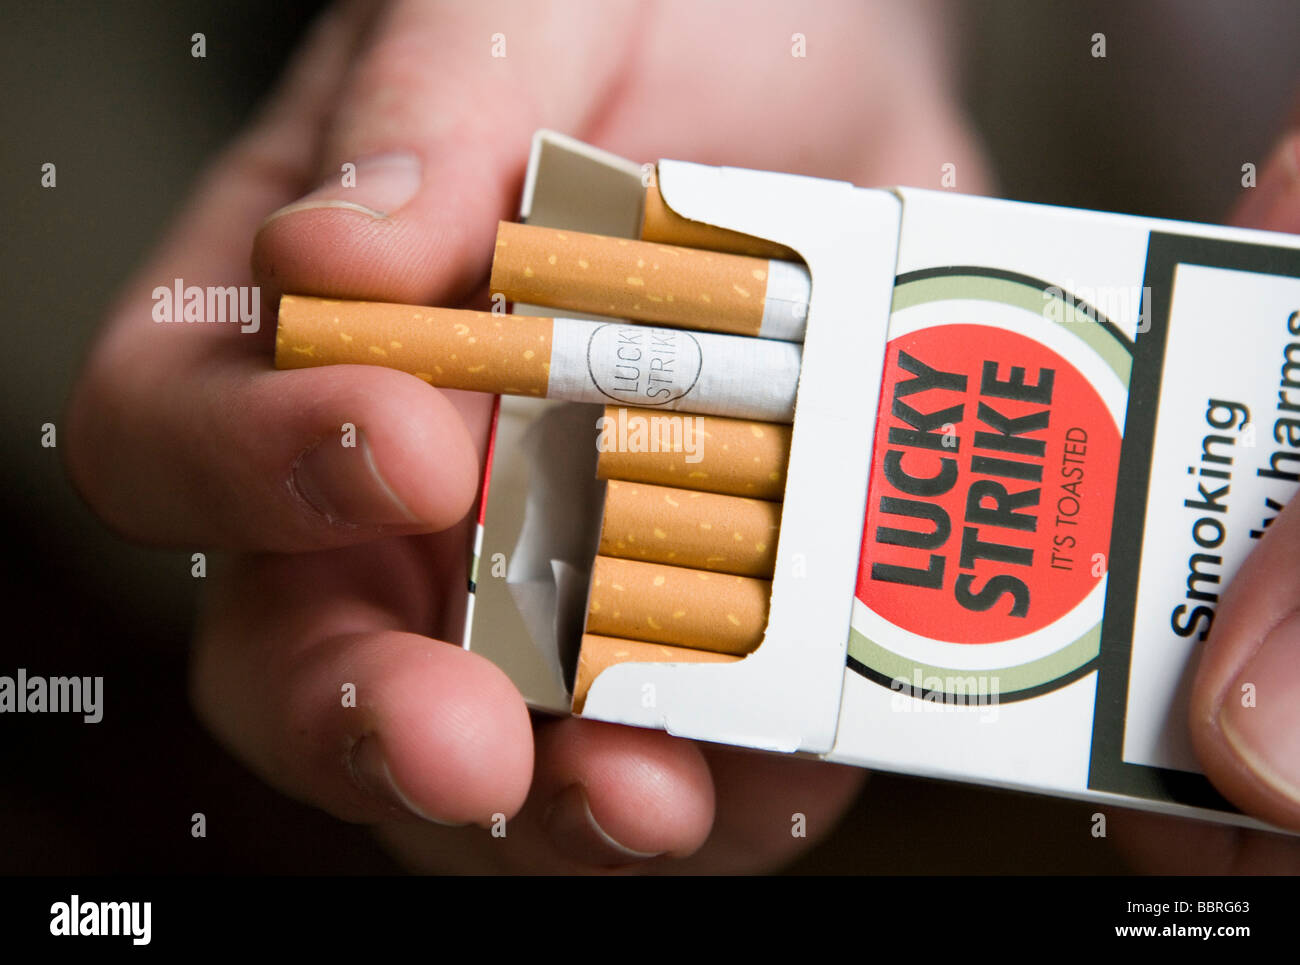 A smoker takes a Lucky Strike cigarette made by British American Tobacco from a packet Stock Photo